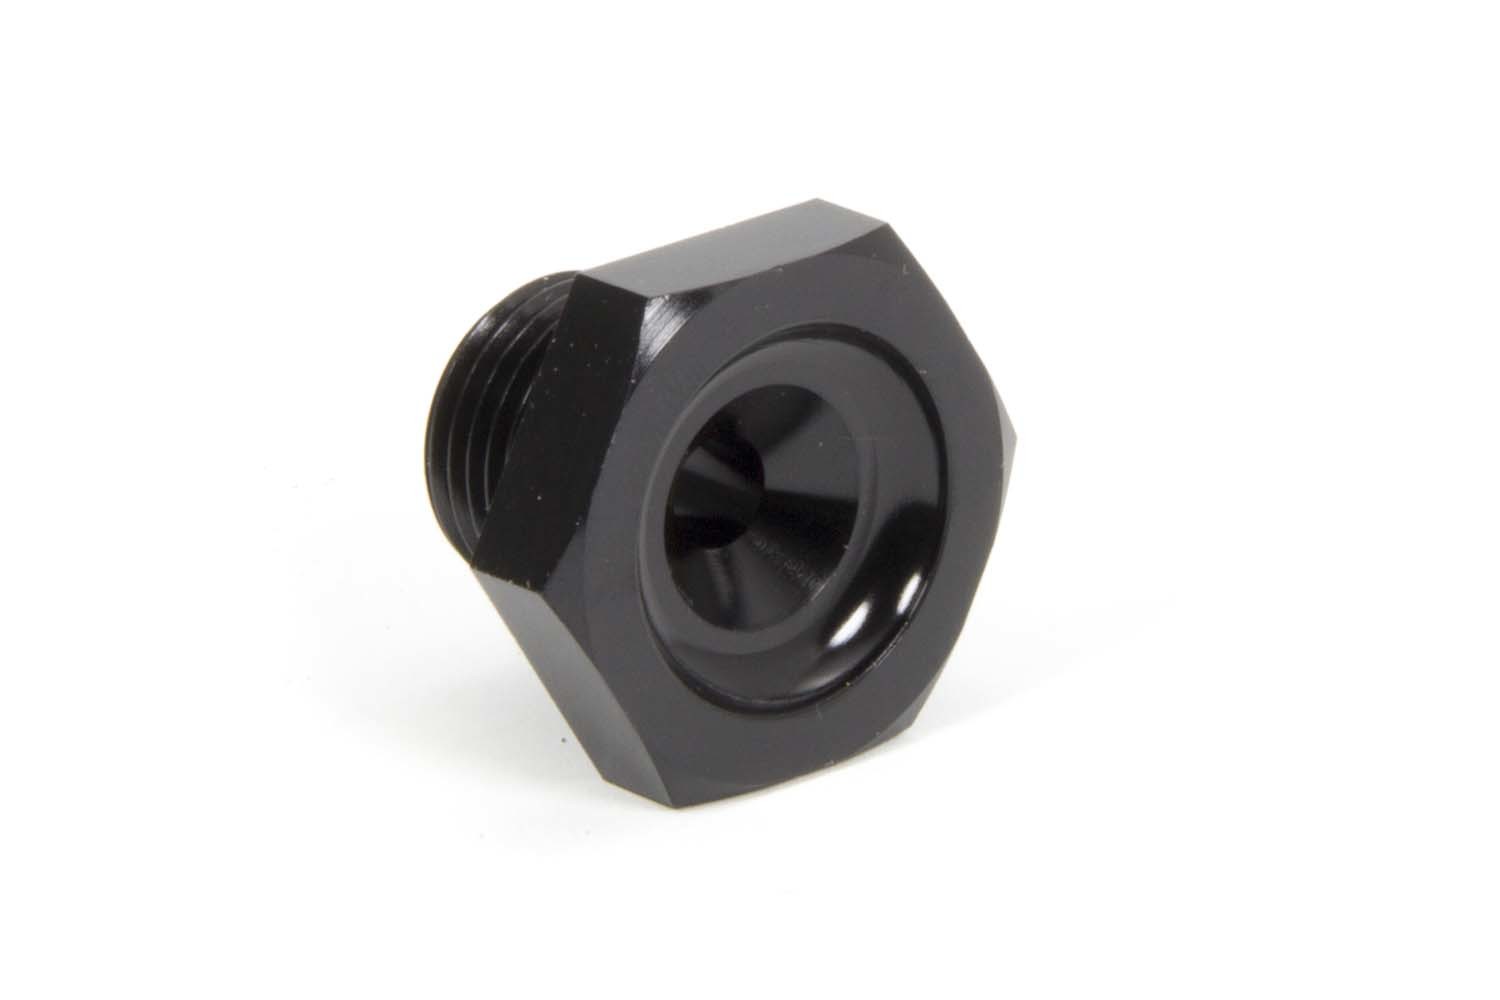 Winters Performance 1109-02A King Pin Cap, 5/8-18 Thread, Aluminum, Black Anodized, Winters Sprint Front Spindles, Each